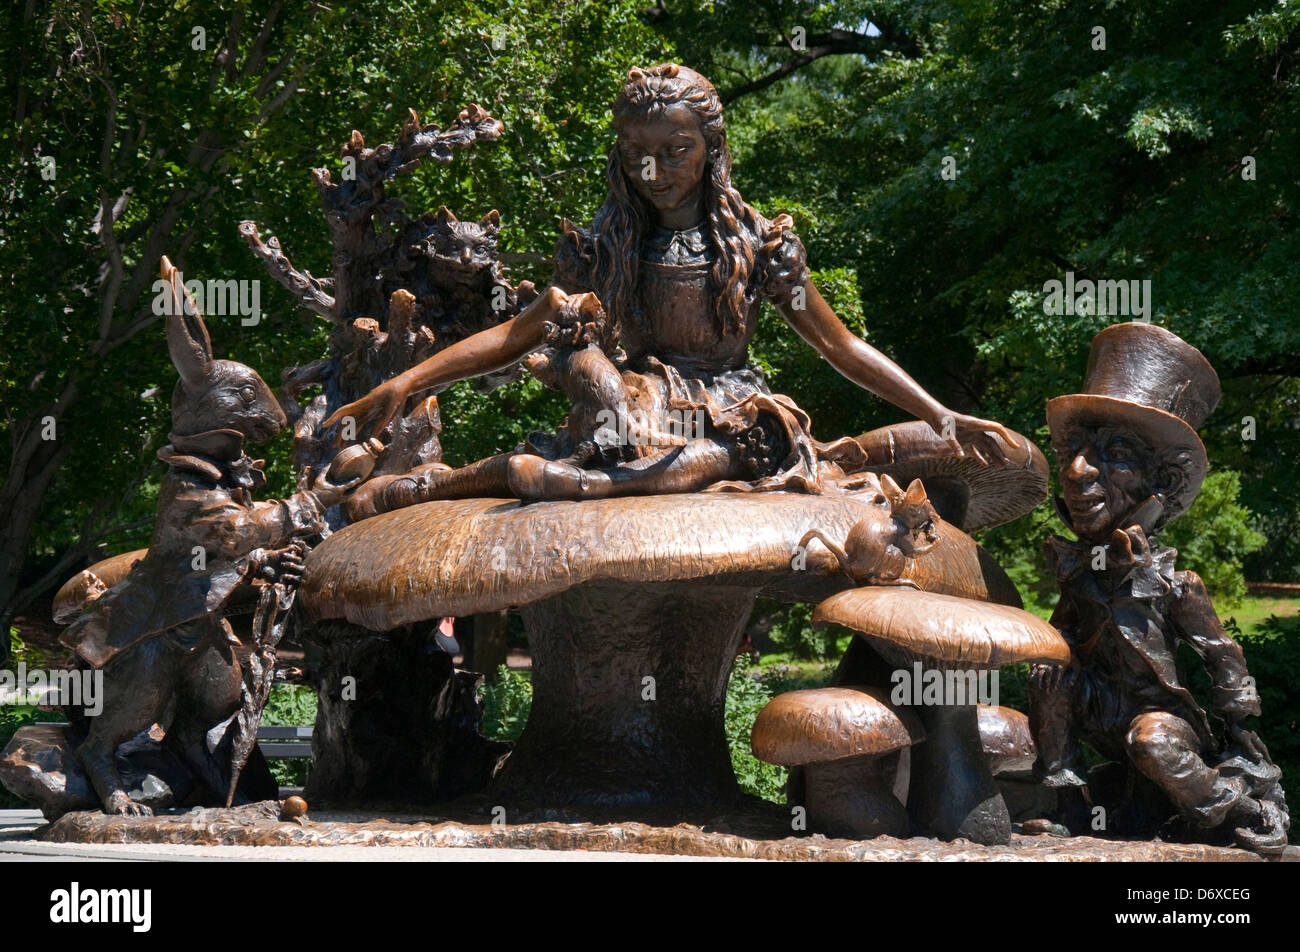 Sculpture of Alice in Wonderland on the North side of Central Park, New York City USA Stock Photo